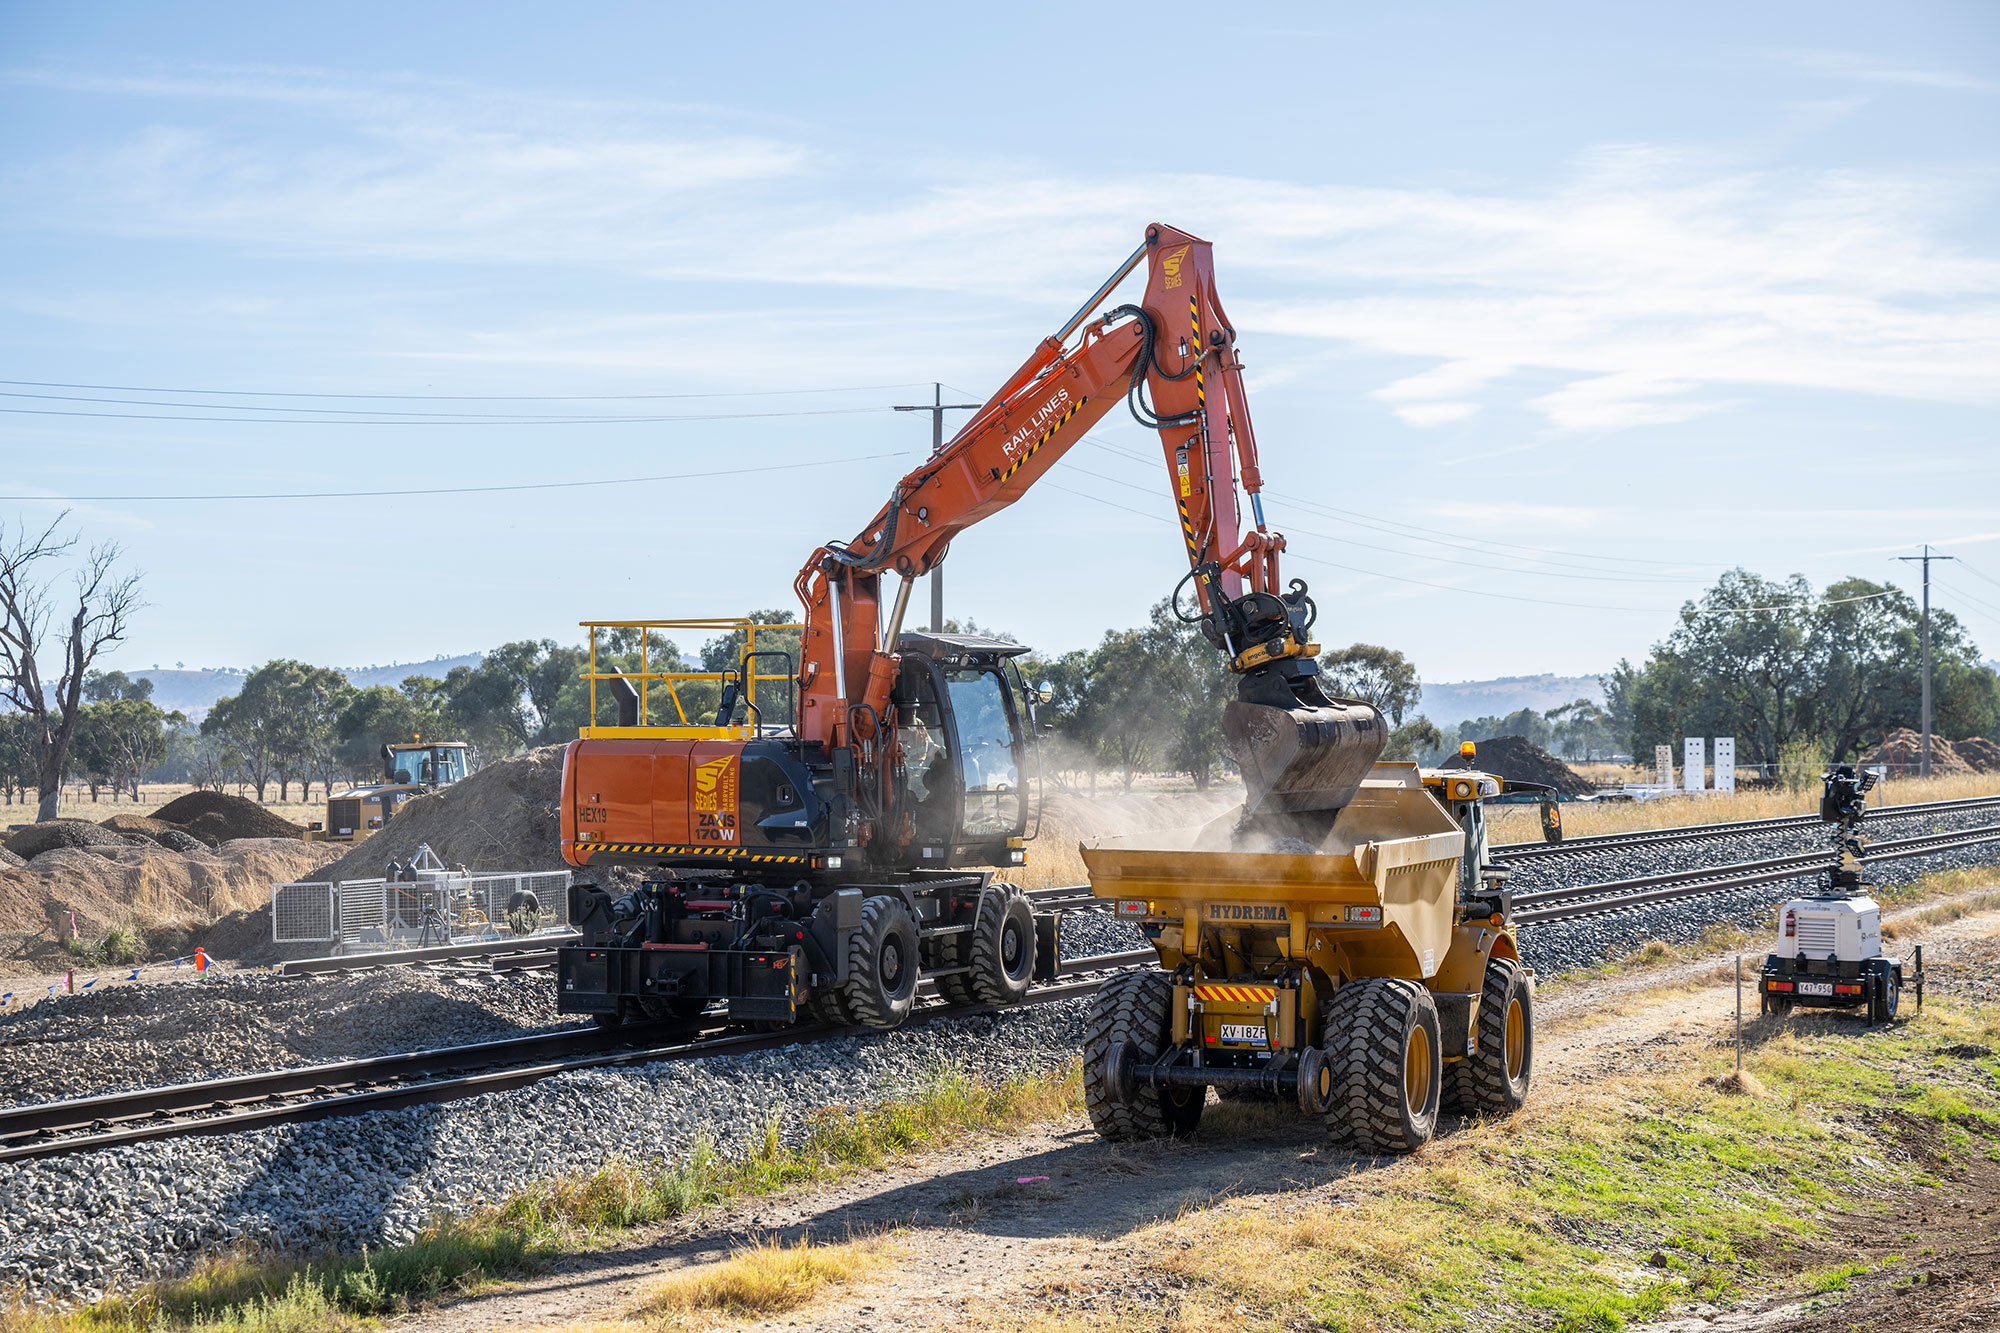 Ballast beting removed prior to excavation at Murray Valley Highway, Barnawartha North during March 2023 60-hour shutdown